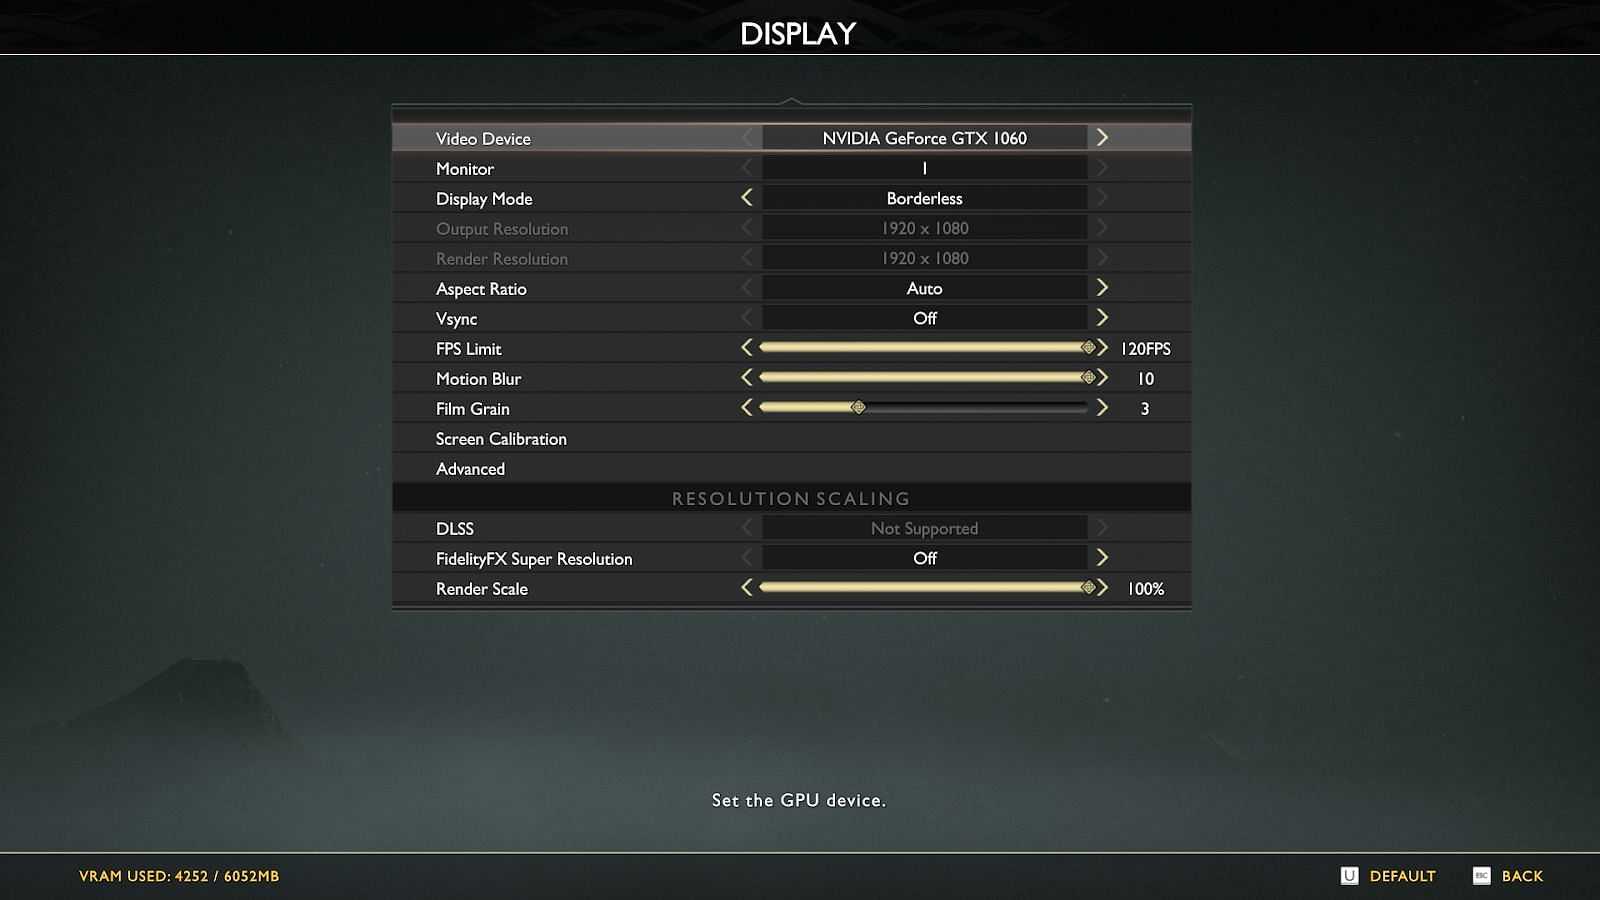 The settings (Image by PlayStation)